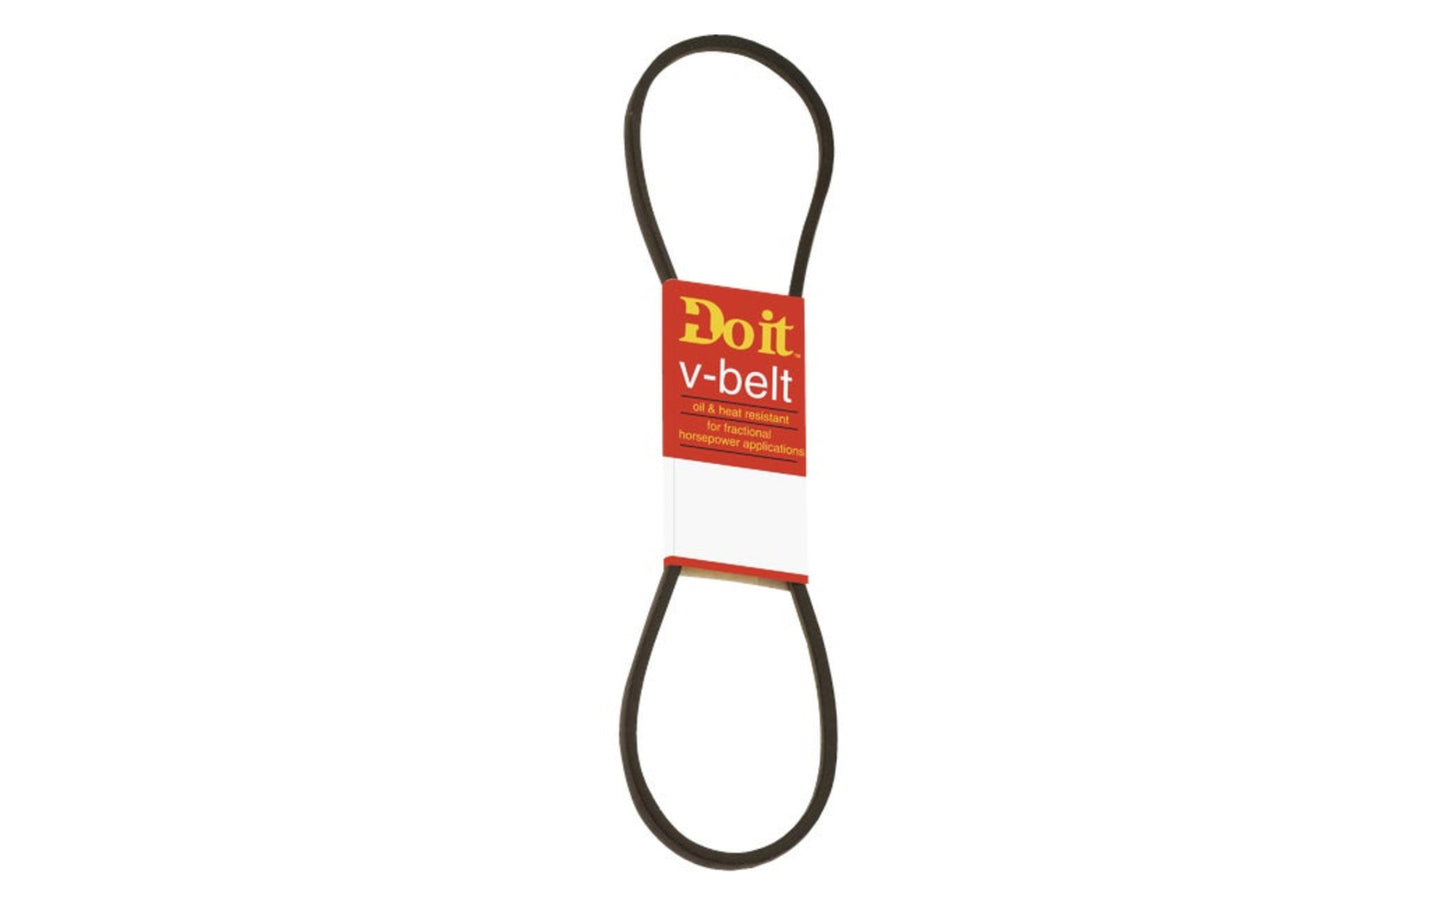 21" Long x 1/2" Width V-Belt - 4L210. Oil & heat resistant. Recommended for 1-3 HP (horsepower) light-duty applications. Typically the best option for electric powered applications. For refrigerators, washing machines, pumps, stokers, woodworking machines. Pulley type: A-Pulley.